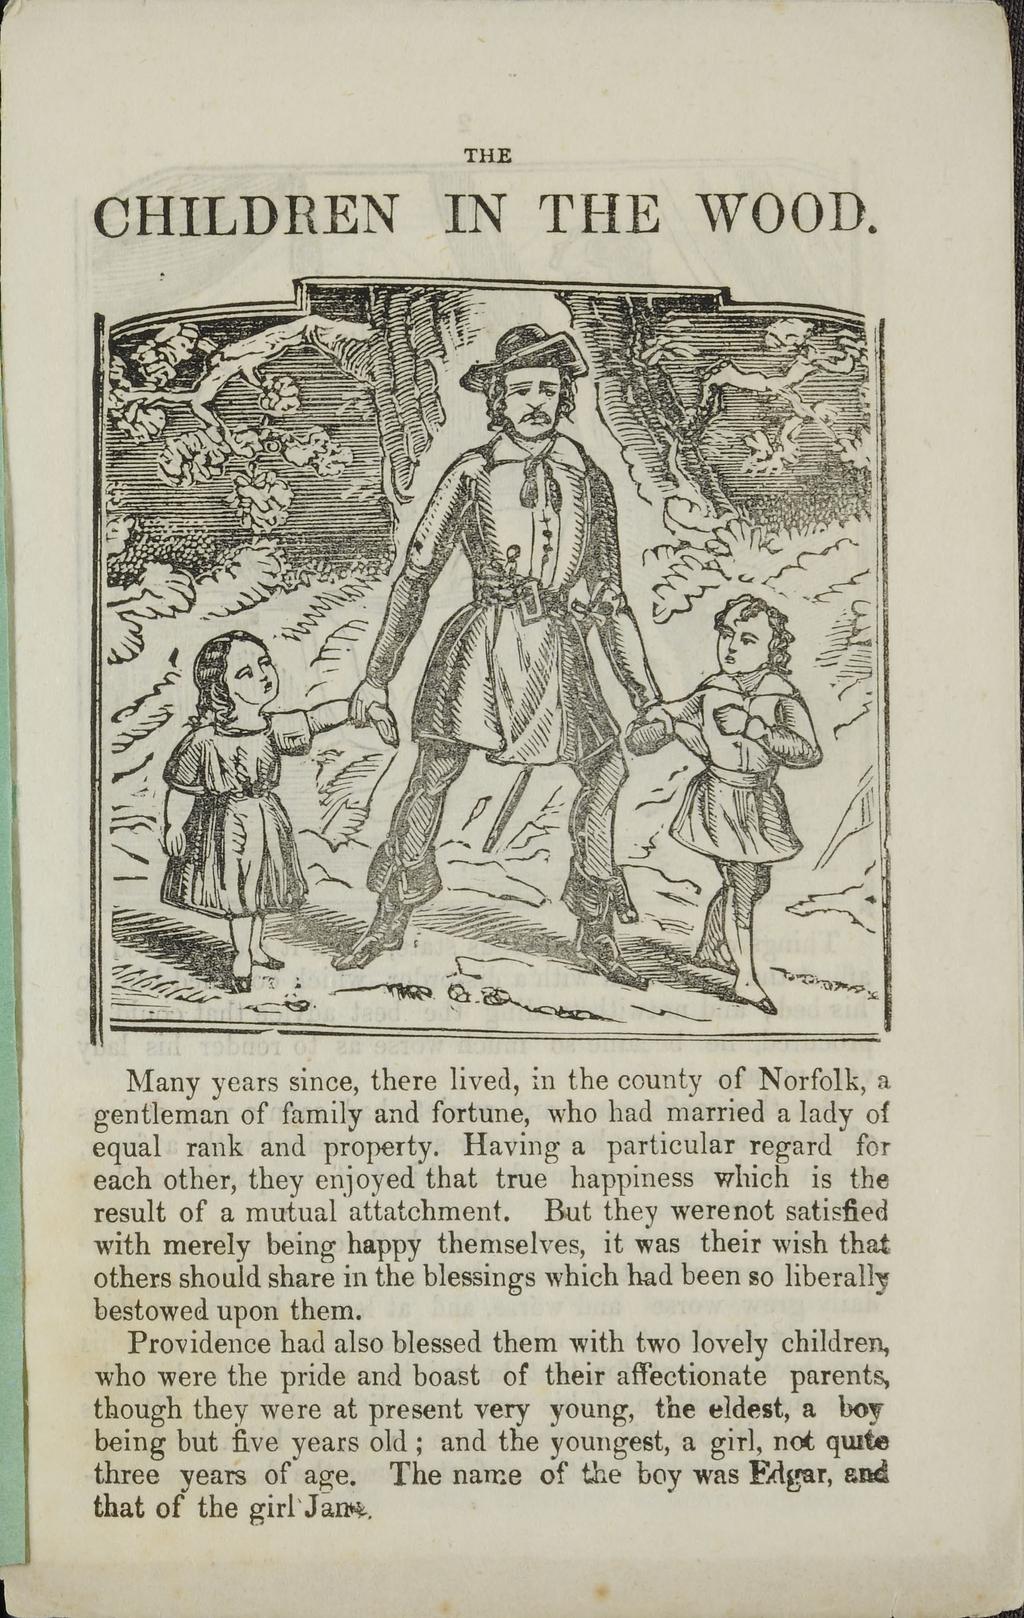 THE CHILDREN IN THE WOOD. Many years since, there lived, in the county of Norfolk, a gentleman of family and fortune, who had married a lady of equal rank and property.